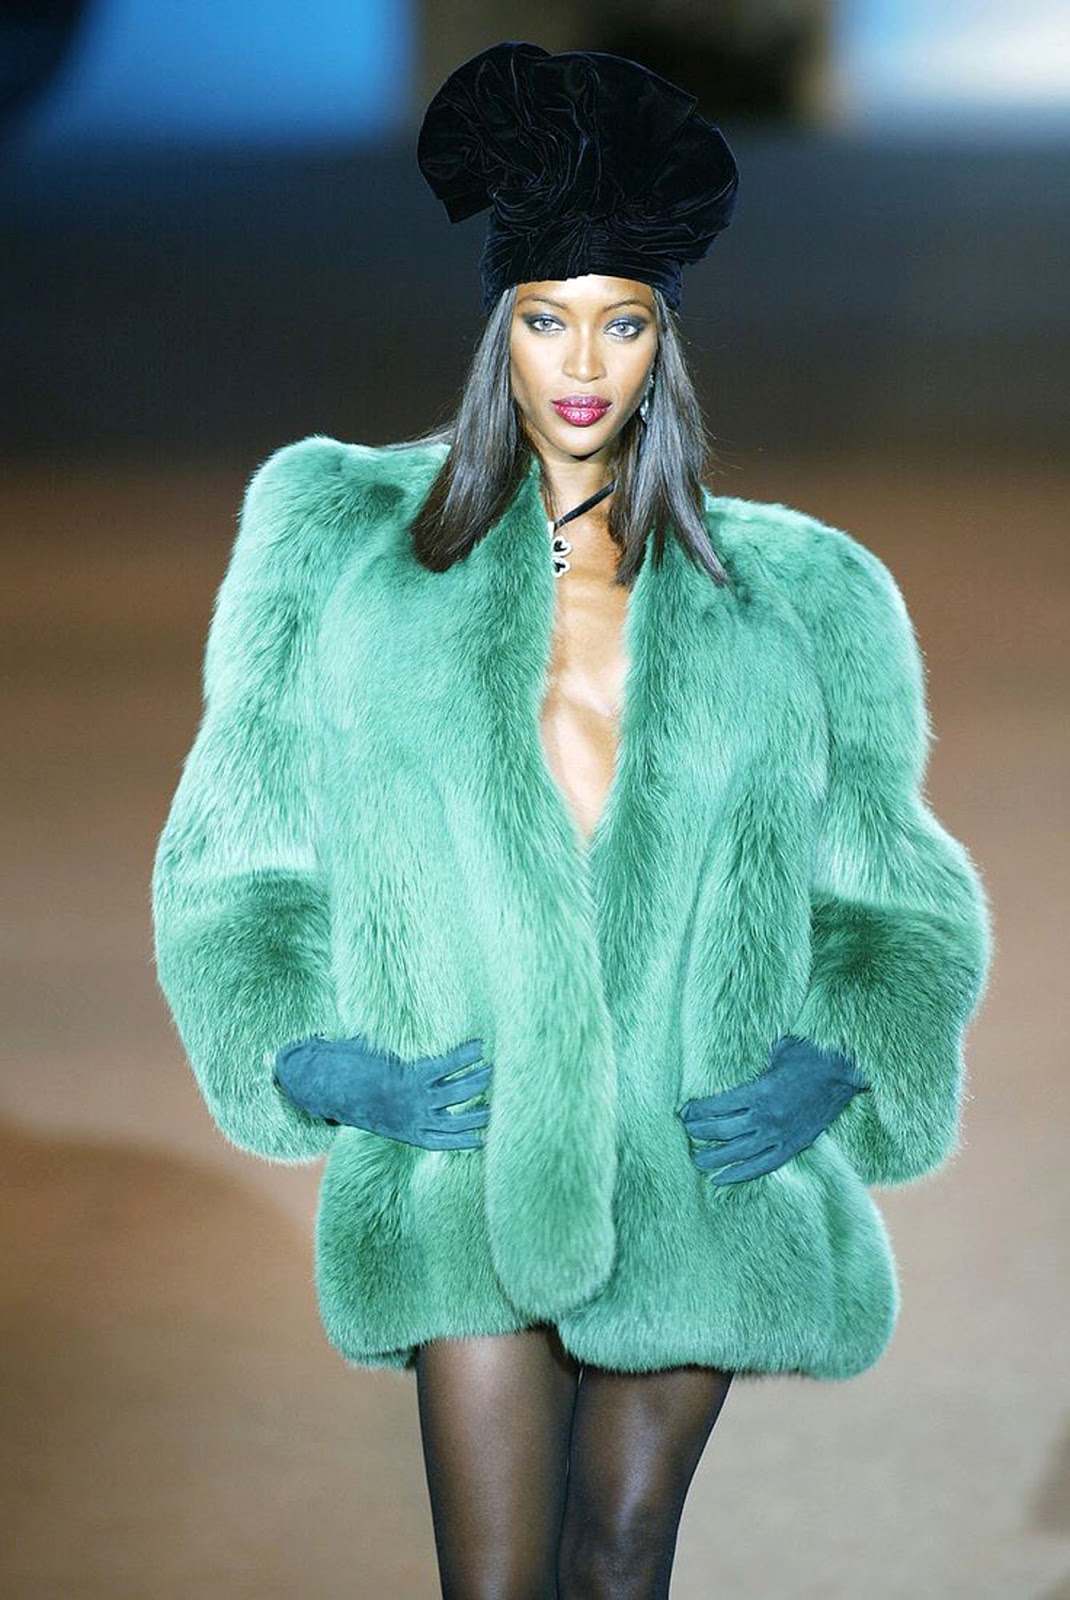 Eniwhere Fashion - Top Models 90's - Naomi Campbell